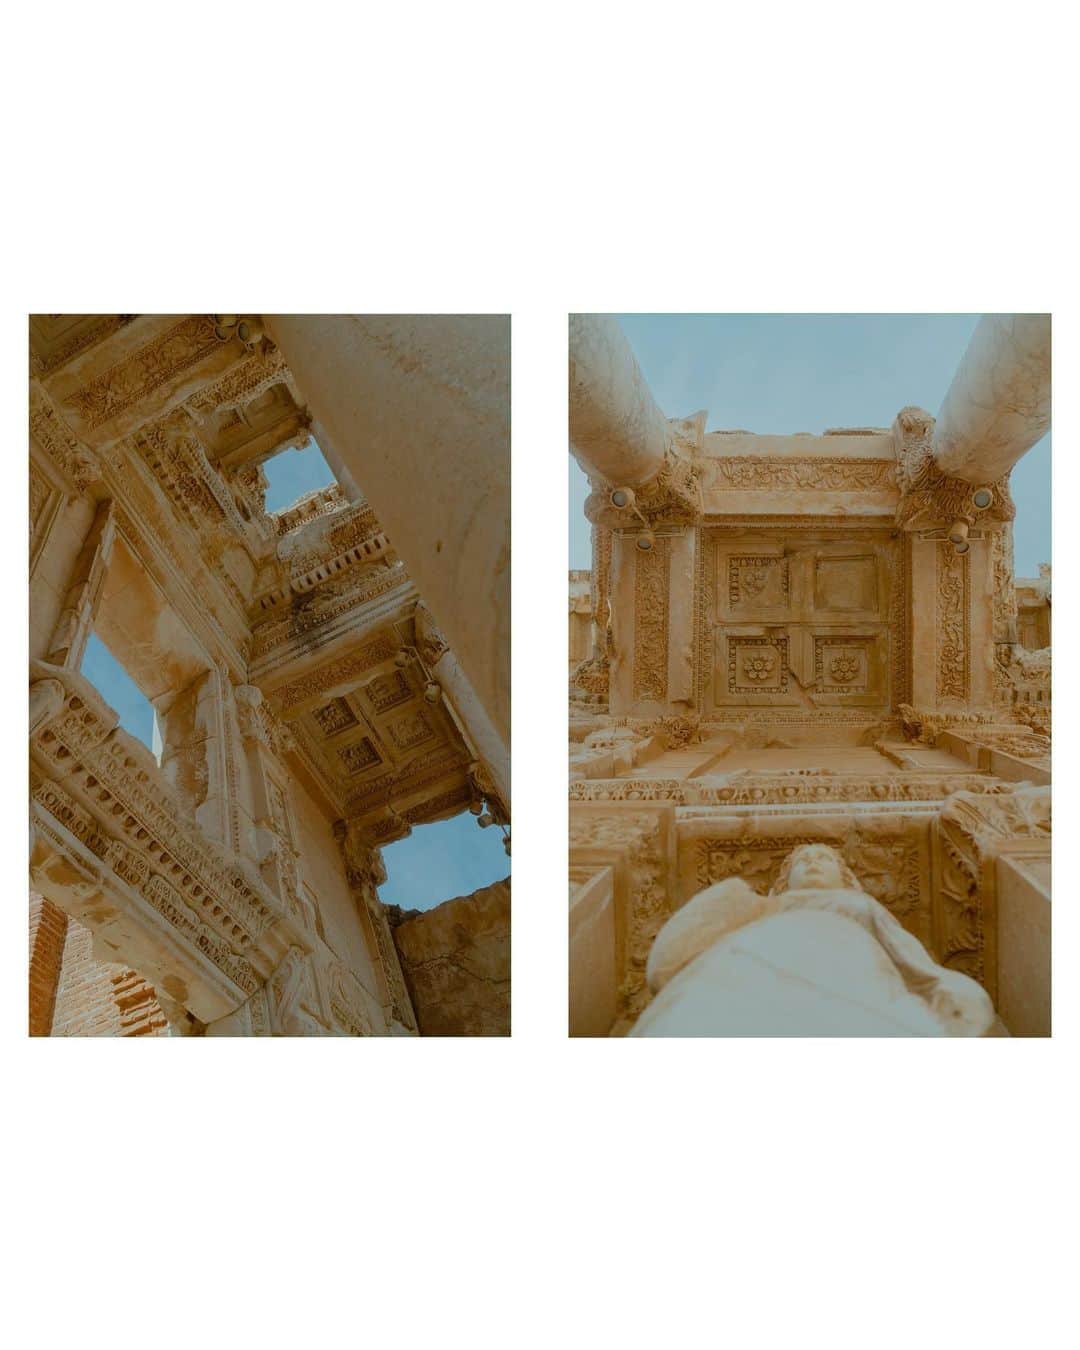 Putri Anindyaさんのインスタグラム写真 - (Putri AnindyaInstagram)「Walking on the history in Ephesus //   I always want to visit this place since I watched it in the documentary when I was a kid. History about human civilization from the greek and romans era always interest me.   The city of Ephesus, located in Izmir region of Türkiye, was one of the most important ports in the ancient world. The city, which was the center of trade for the Mediterranean Sea, has a very old history that changed hands under the rule of many kingdoms and empires many times.  According to legend, the Ionian prince Androclos founded Ephesus in the 11th century BC. The legend says that as Androclos searched for a new Greek settlement, he turned to the oracles for guidance. The oracles told him a boar and a fish would show him the new location.  One day, as Androclos was frying fish over an open fire, a fish flopped out of the frying pan and landed in the nearby bushes. A spark ignited the bushes and a wild boar ran out. Recalling the oracles’ wisdom, Androclos built his new settlement where the bushes stood and called it Ephesus.   This story also told in a very beautiful digital experience in the @demmuseums @ephesusexpmuseum , a recently opened museum in Ephesus where they also explain the importance of the goddess Artemis and its temple. But on 356 BC, the day Alexander the Great was said to have been born, the temple burned to the ground.   This history of a city coming under the rule of so many diverse groups, from Lydians, Persians, Greeks, Romans and more, only shows the strategic importance of Ephesus and its location in antiquity.   In 129 BC the city became the seat of the regional Roman governor. The reforms of Caesar Augustus brought Ephesus to its most prosperous time, which lasted until the third century A.D. Many of the most iconic structures visible today, such as the Library of Celsus (first and the last of my first slide collage) were built around this period.   Well the story is looong but it is super interesting. I just love ancient historical places so much 🫶🏼   So which slide is your favorite? And have you been here?   #TurkAegean #Goİzmir #EfesKültürYoluFestivali   @goturkiye @goizmir」11月8日 22時31分 - puanindya